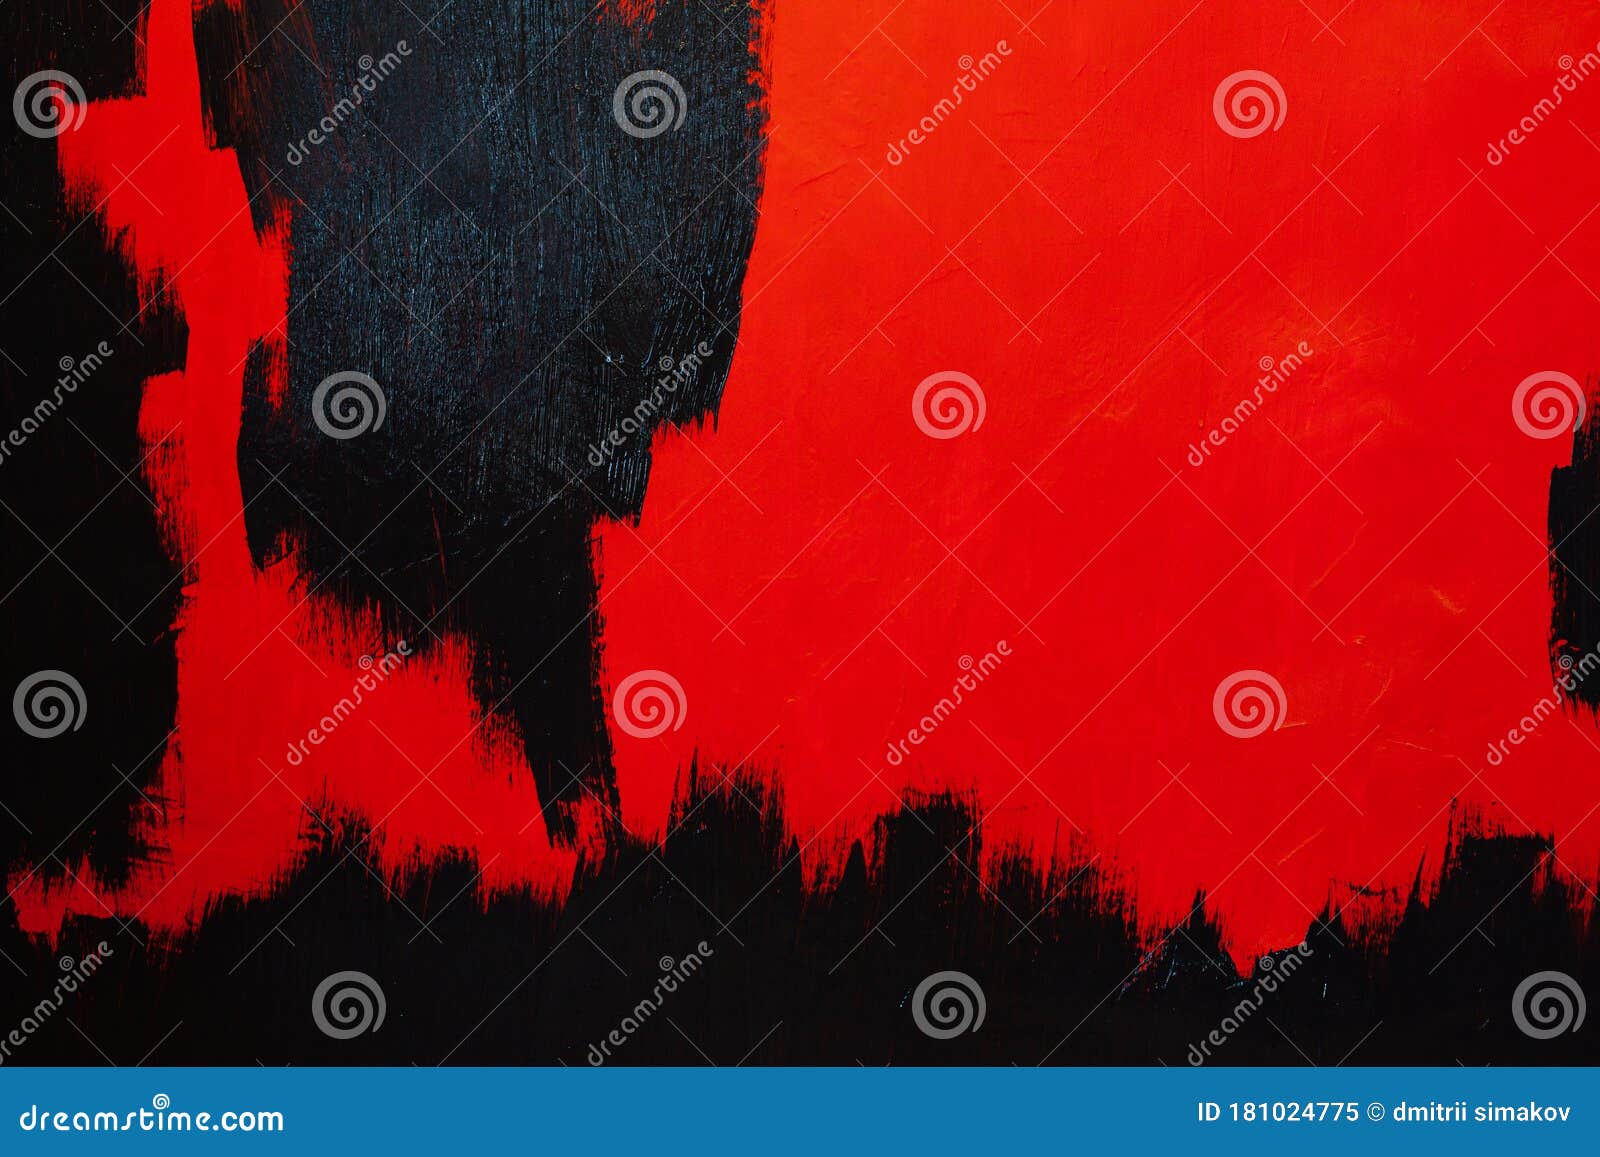 Brush Painted Black Red Wall Background Structure Stock Image - Image